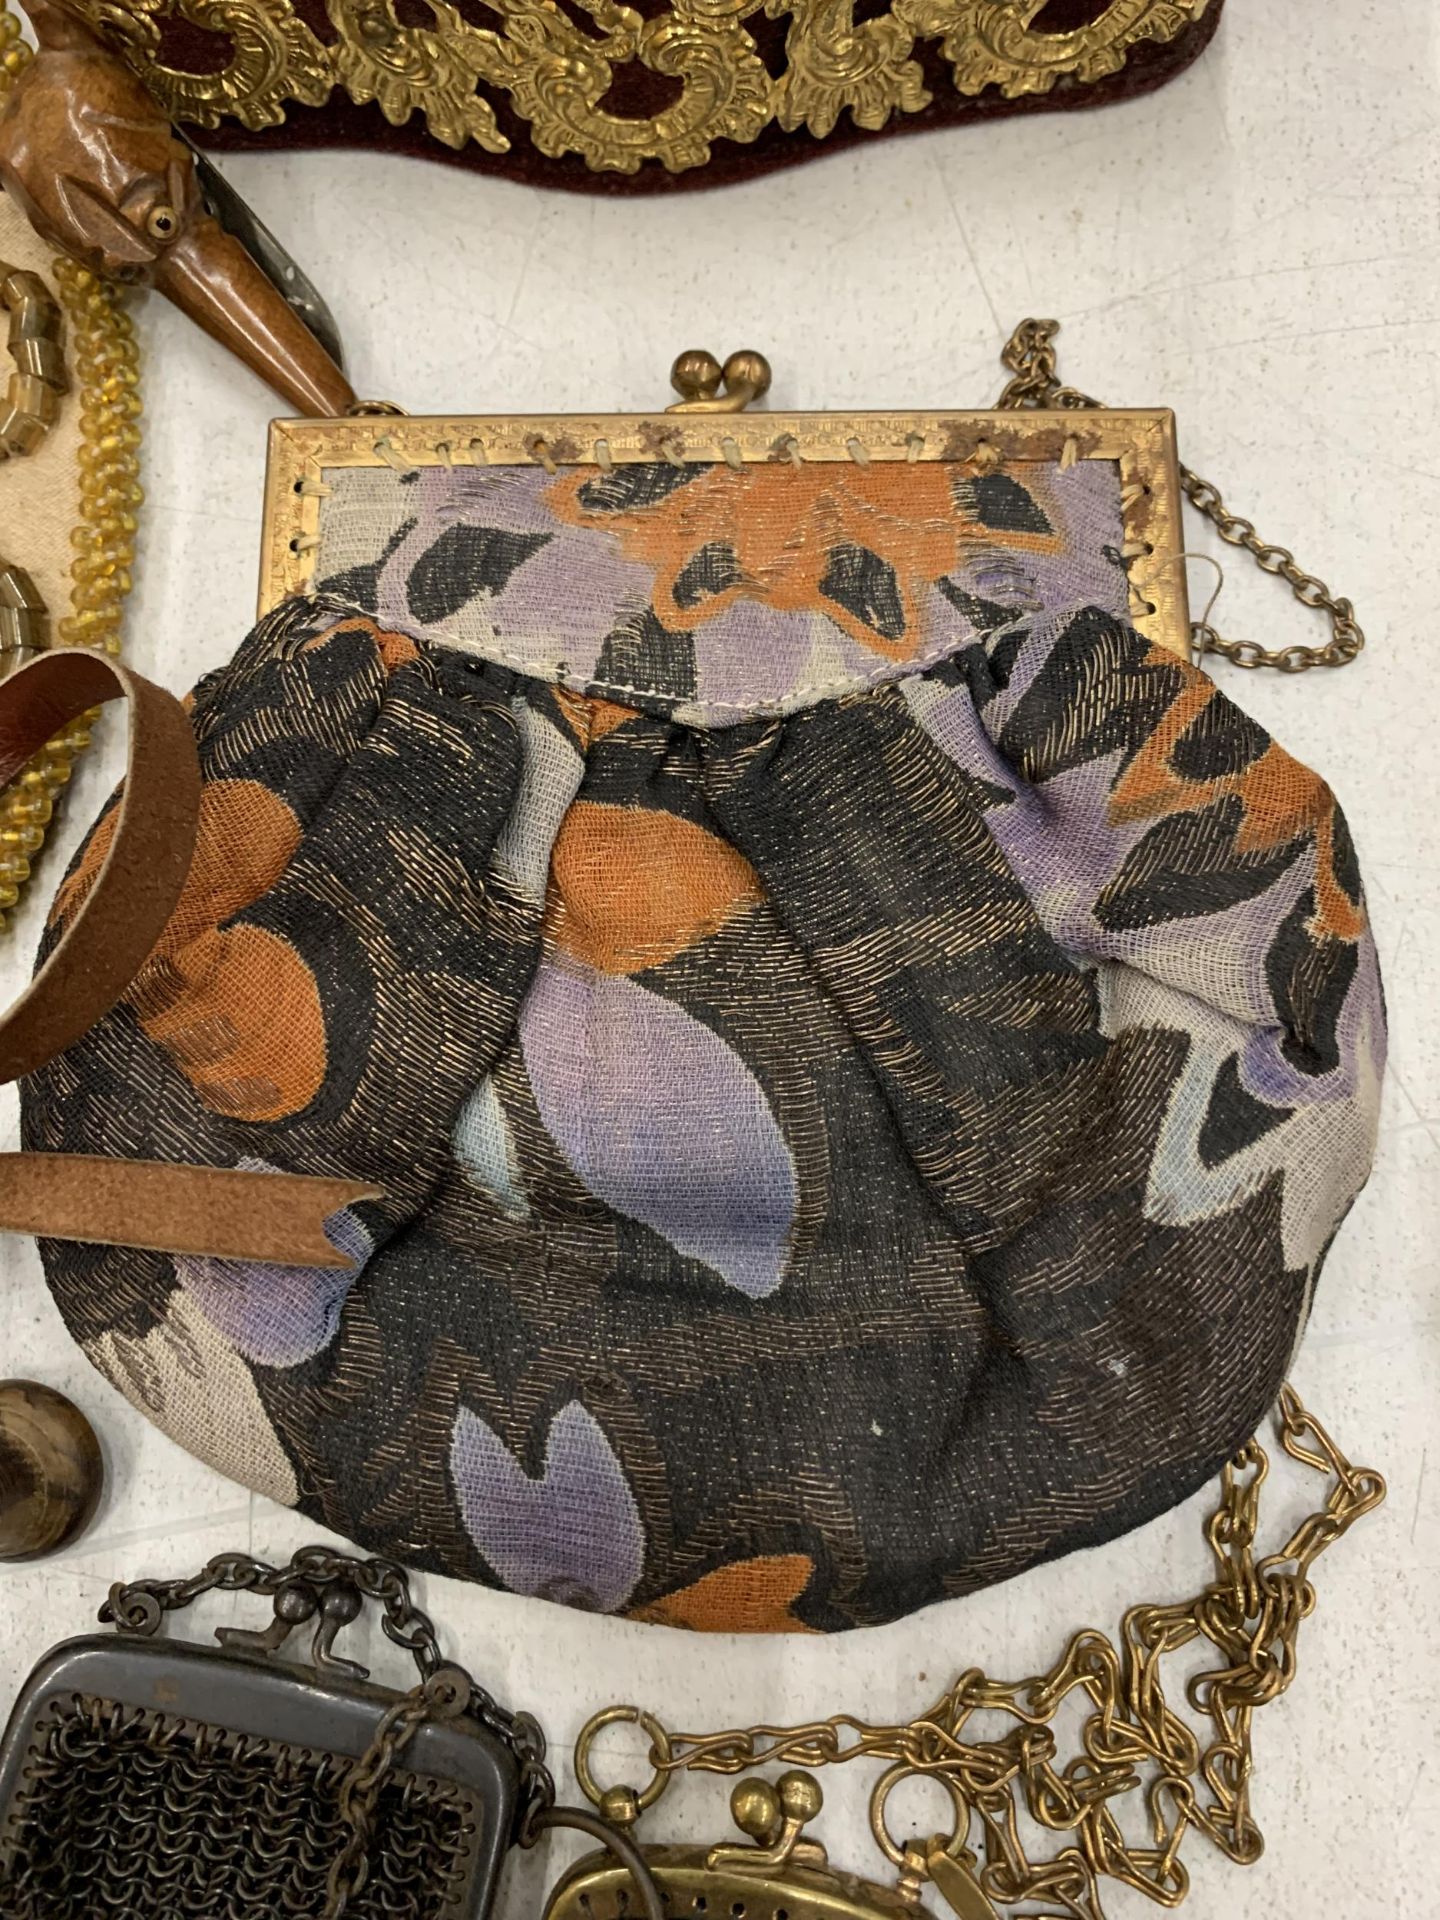 A SILVER PLATED 'FINGER' PURSE, MINIATURE CHAIN BAGS, FABRIC BAGS, BADGES, BROOCHES, ETC - Image 3 of 4